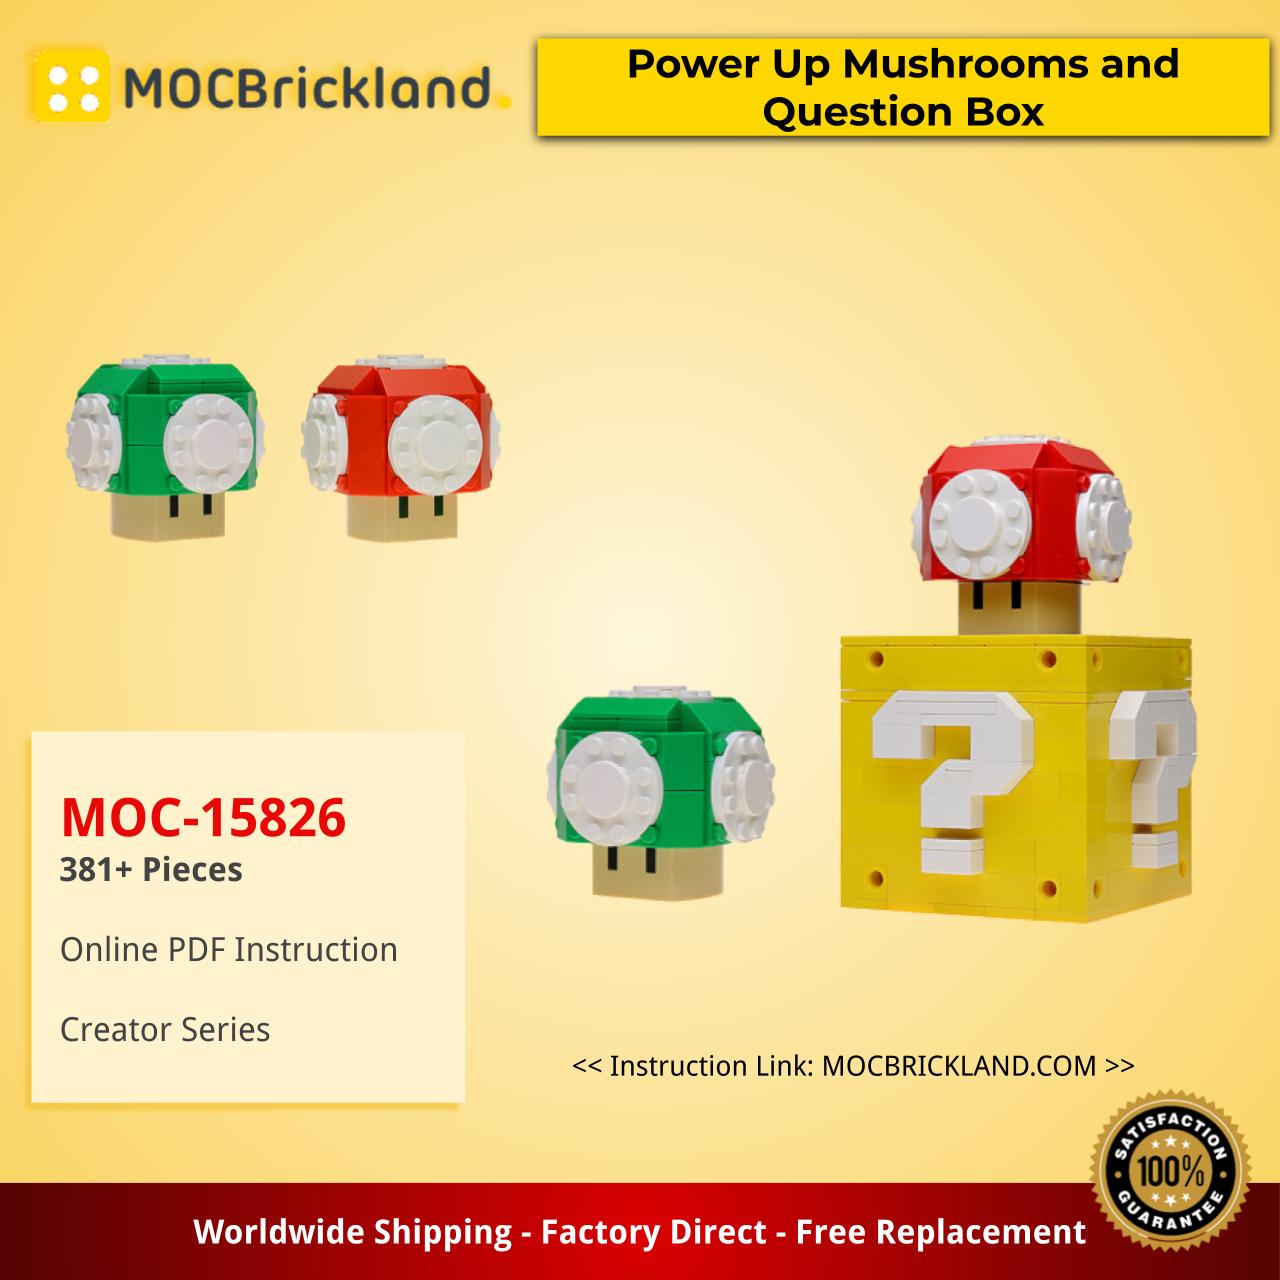 Creator MOC-15826 Custom Power Up Mushrooms and Question Box by buildbetterbricks MOCBRICKLAND